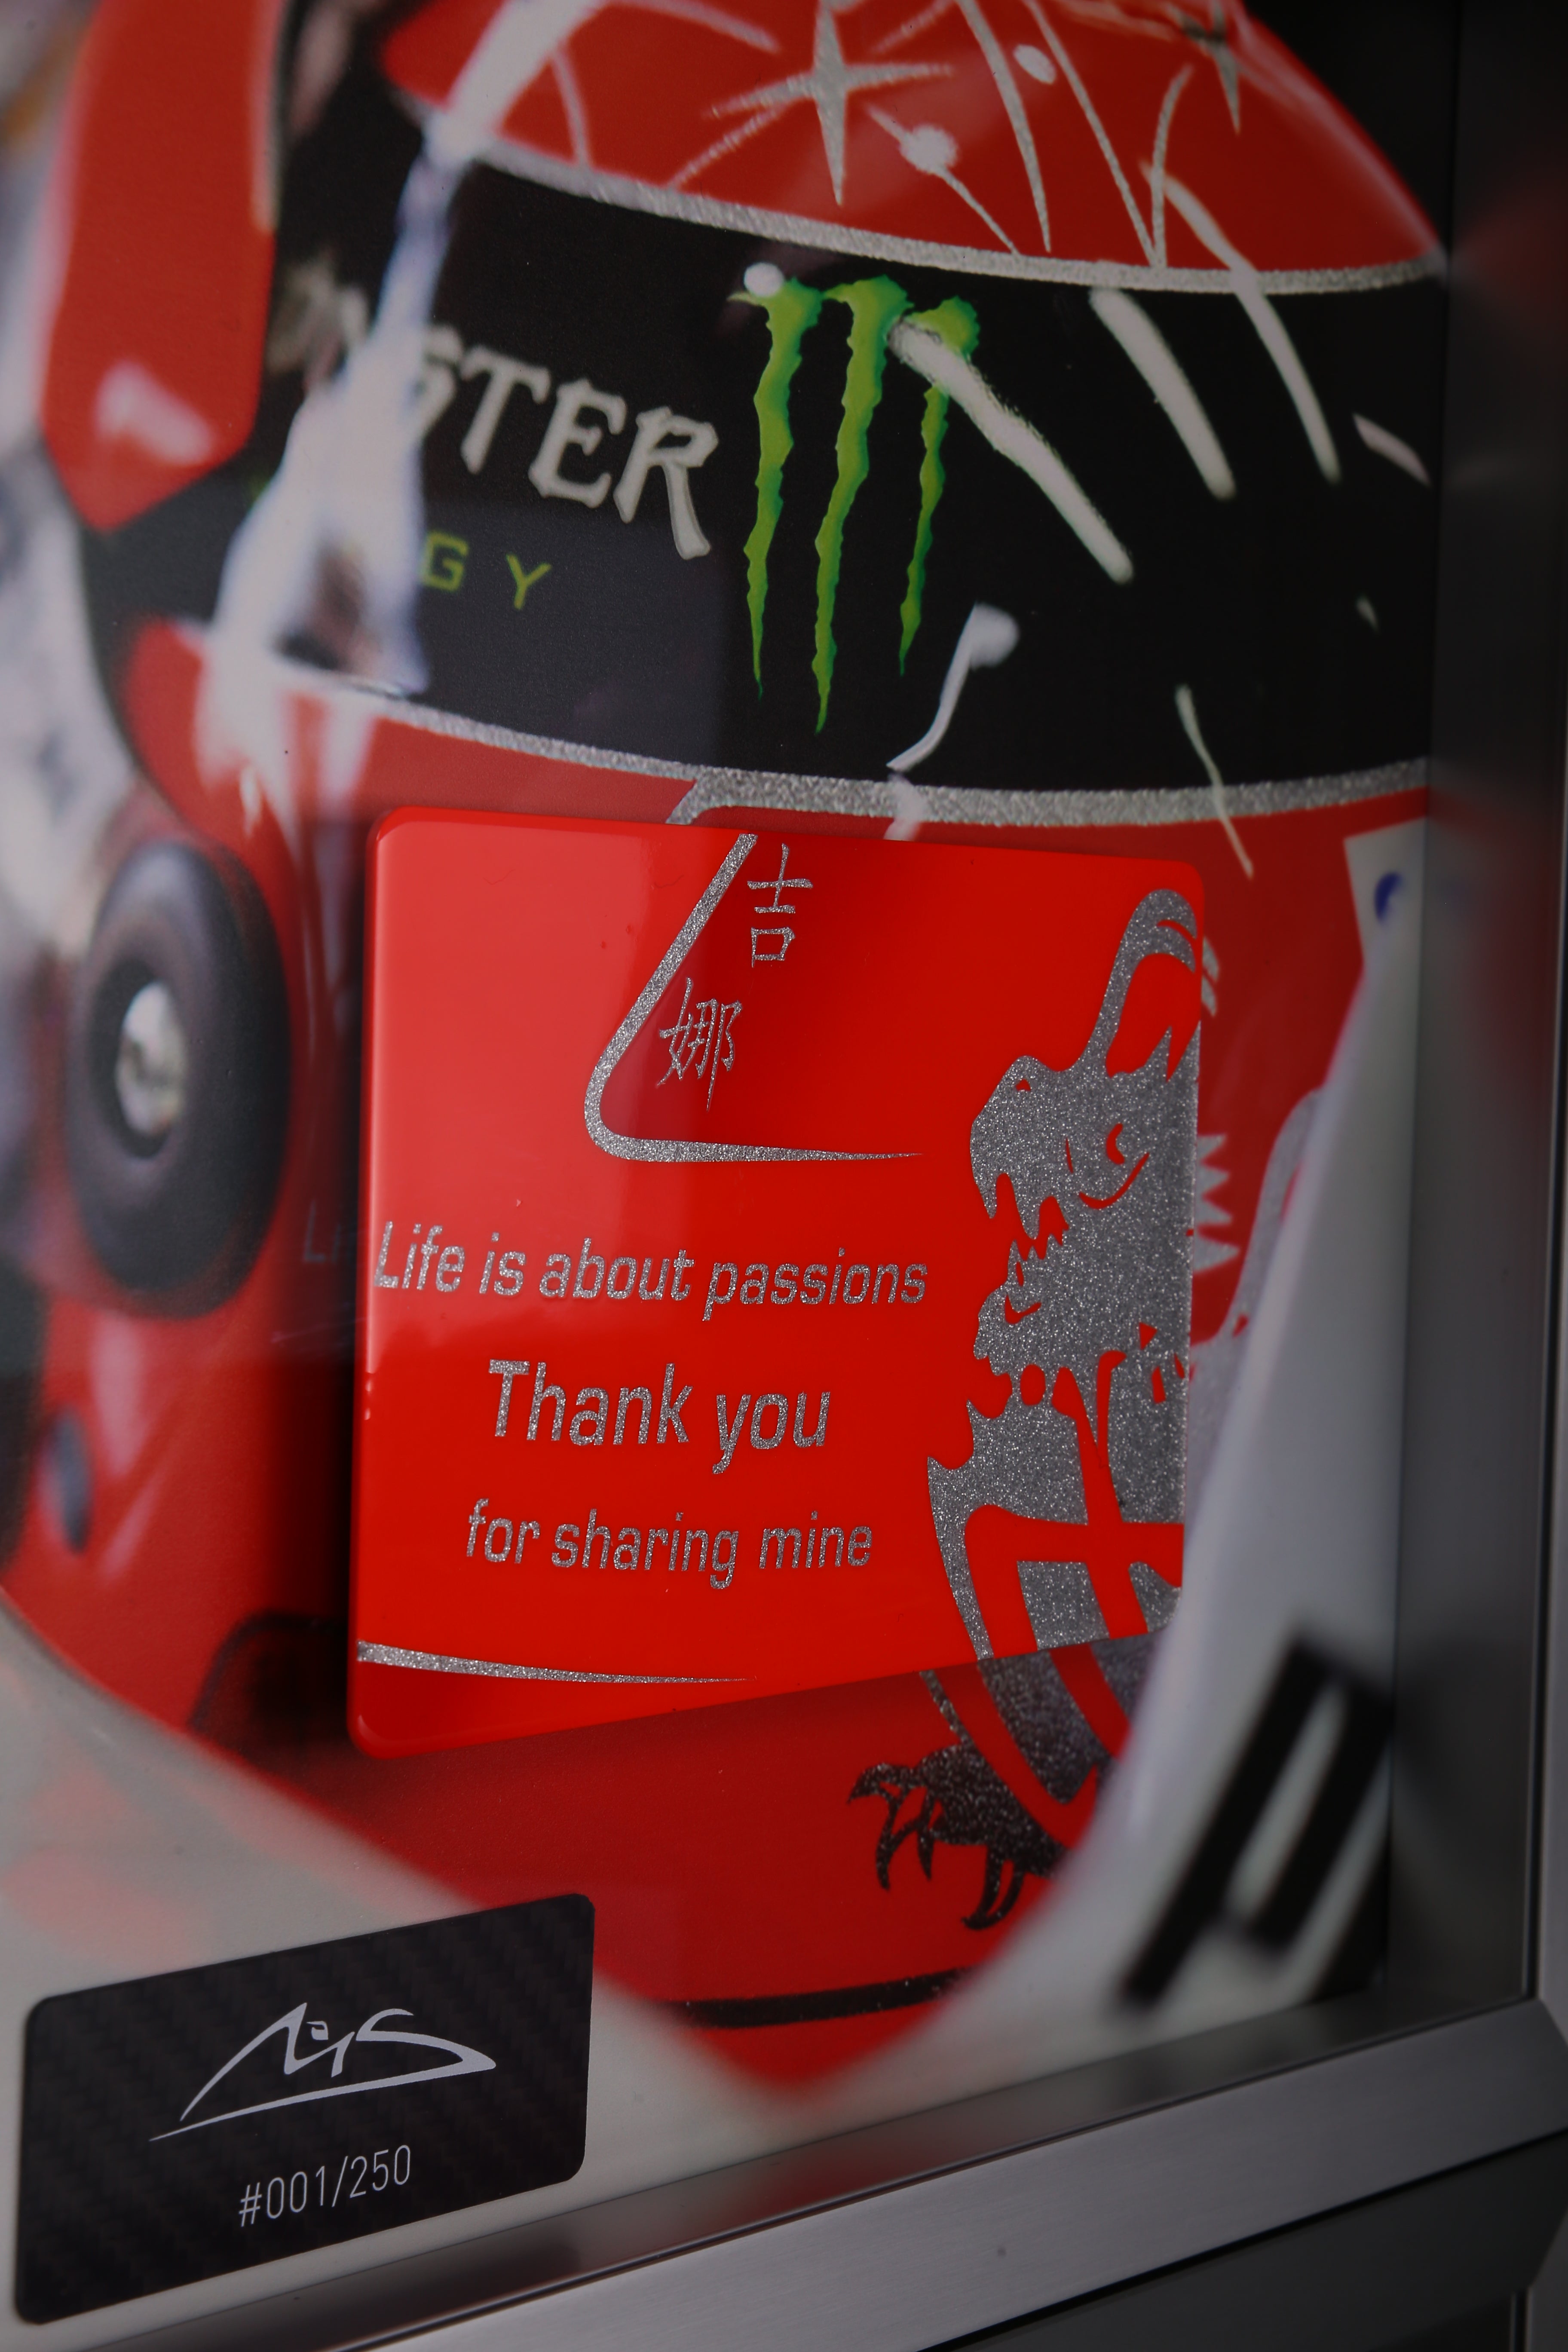 Michael Schumacher 2012 picture with hand-painted carbon plate "Life is about passion, Thank you for sharing mine"